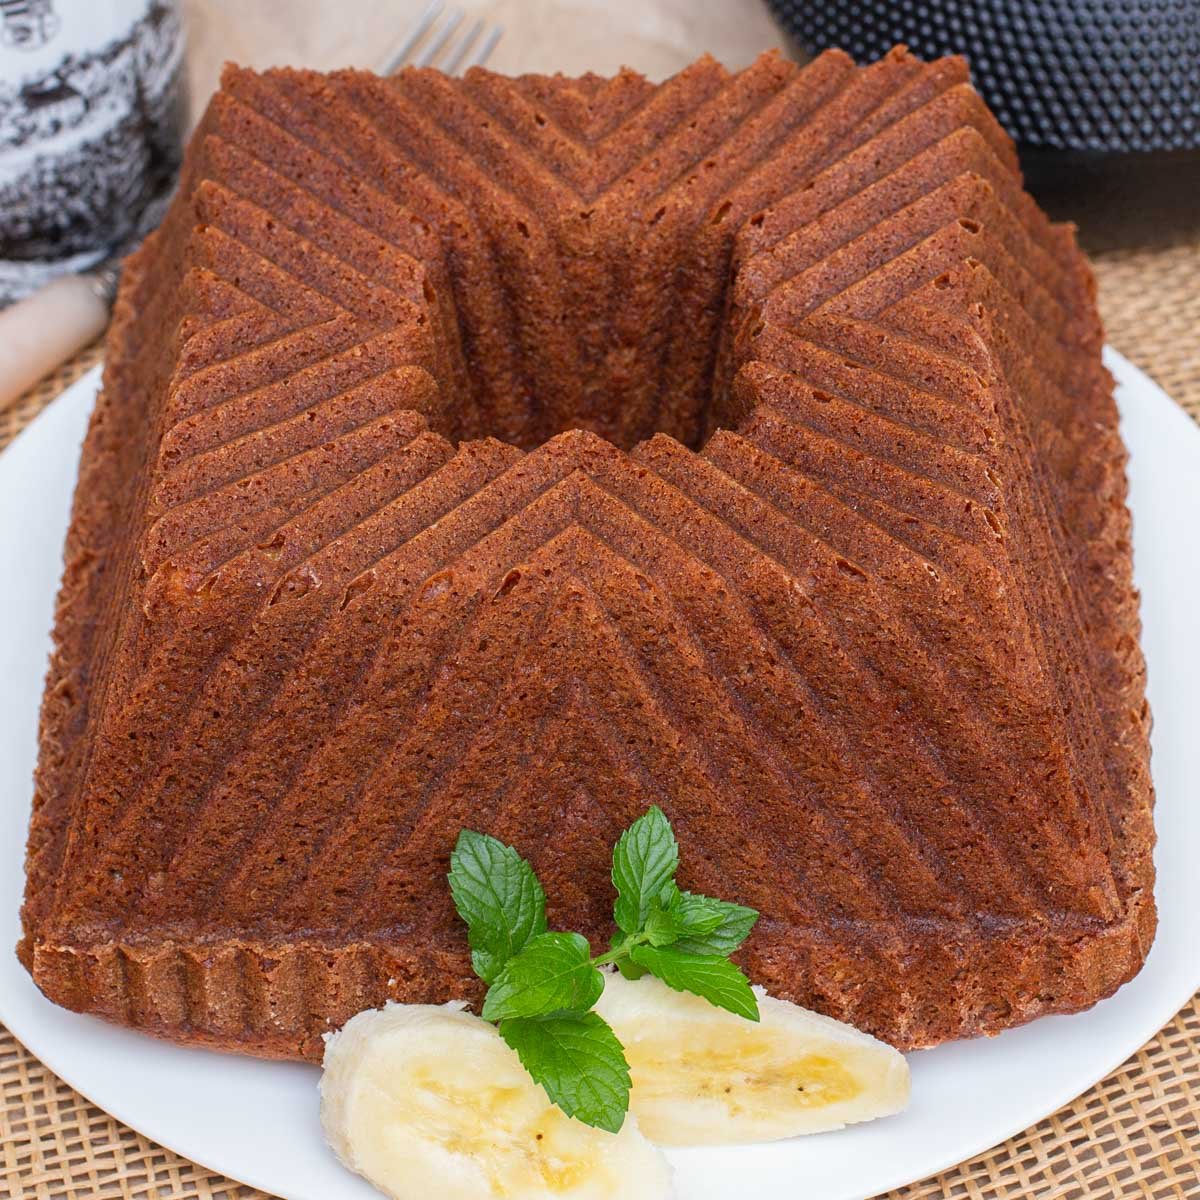 Banana bread on white plate, made in decorative square bundt cake pan, garnished with mint and sliced bananas.